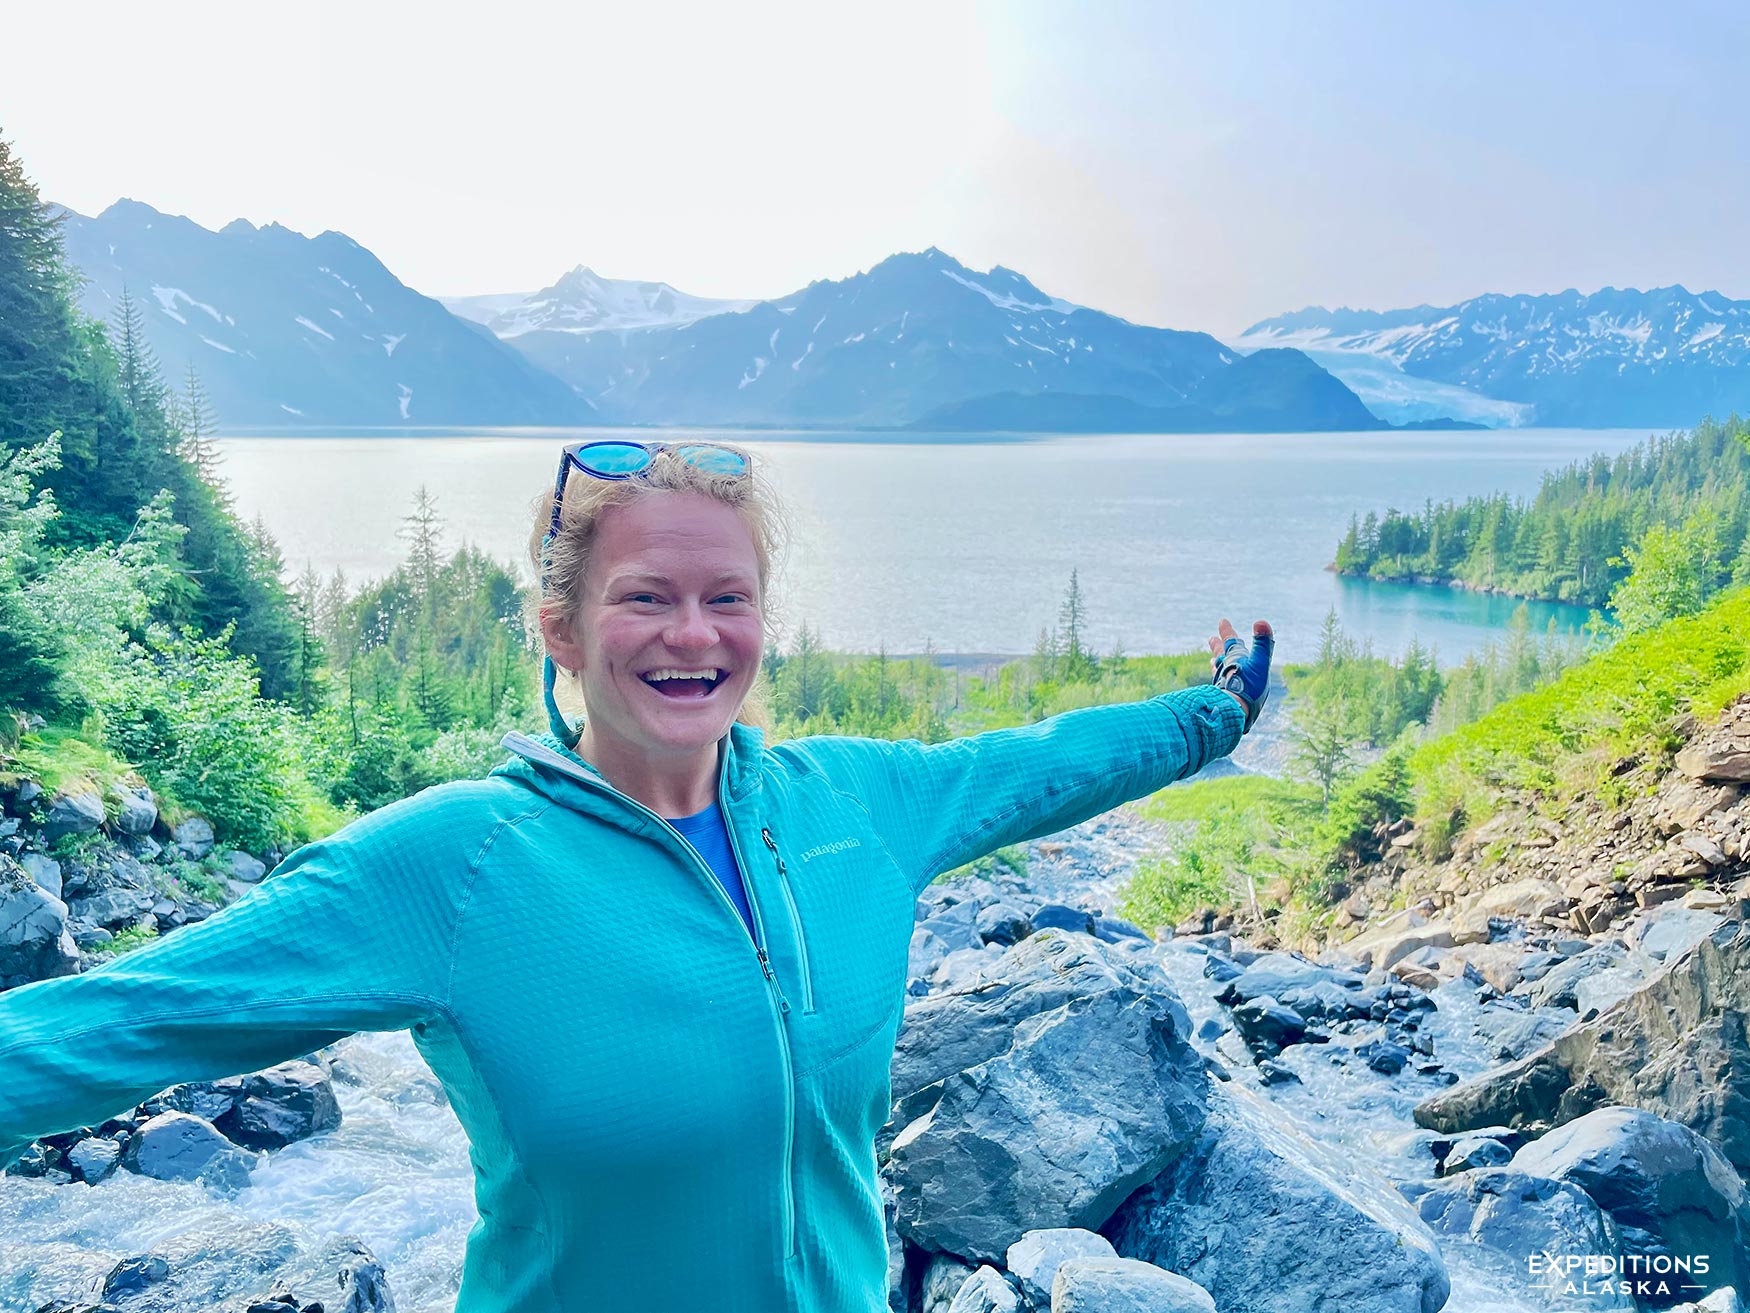 Expeditions Alaska guide Christie Conway